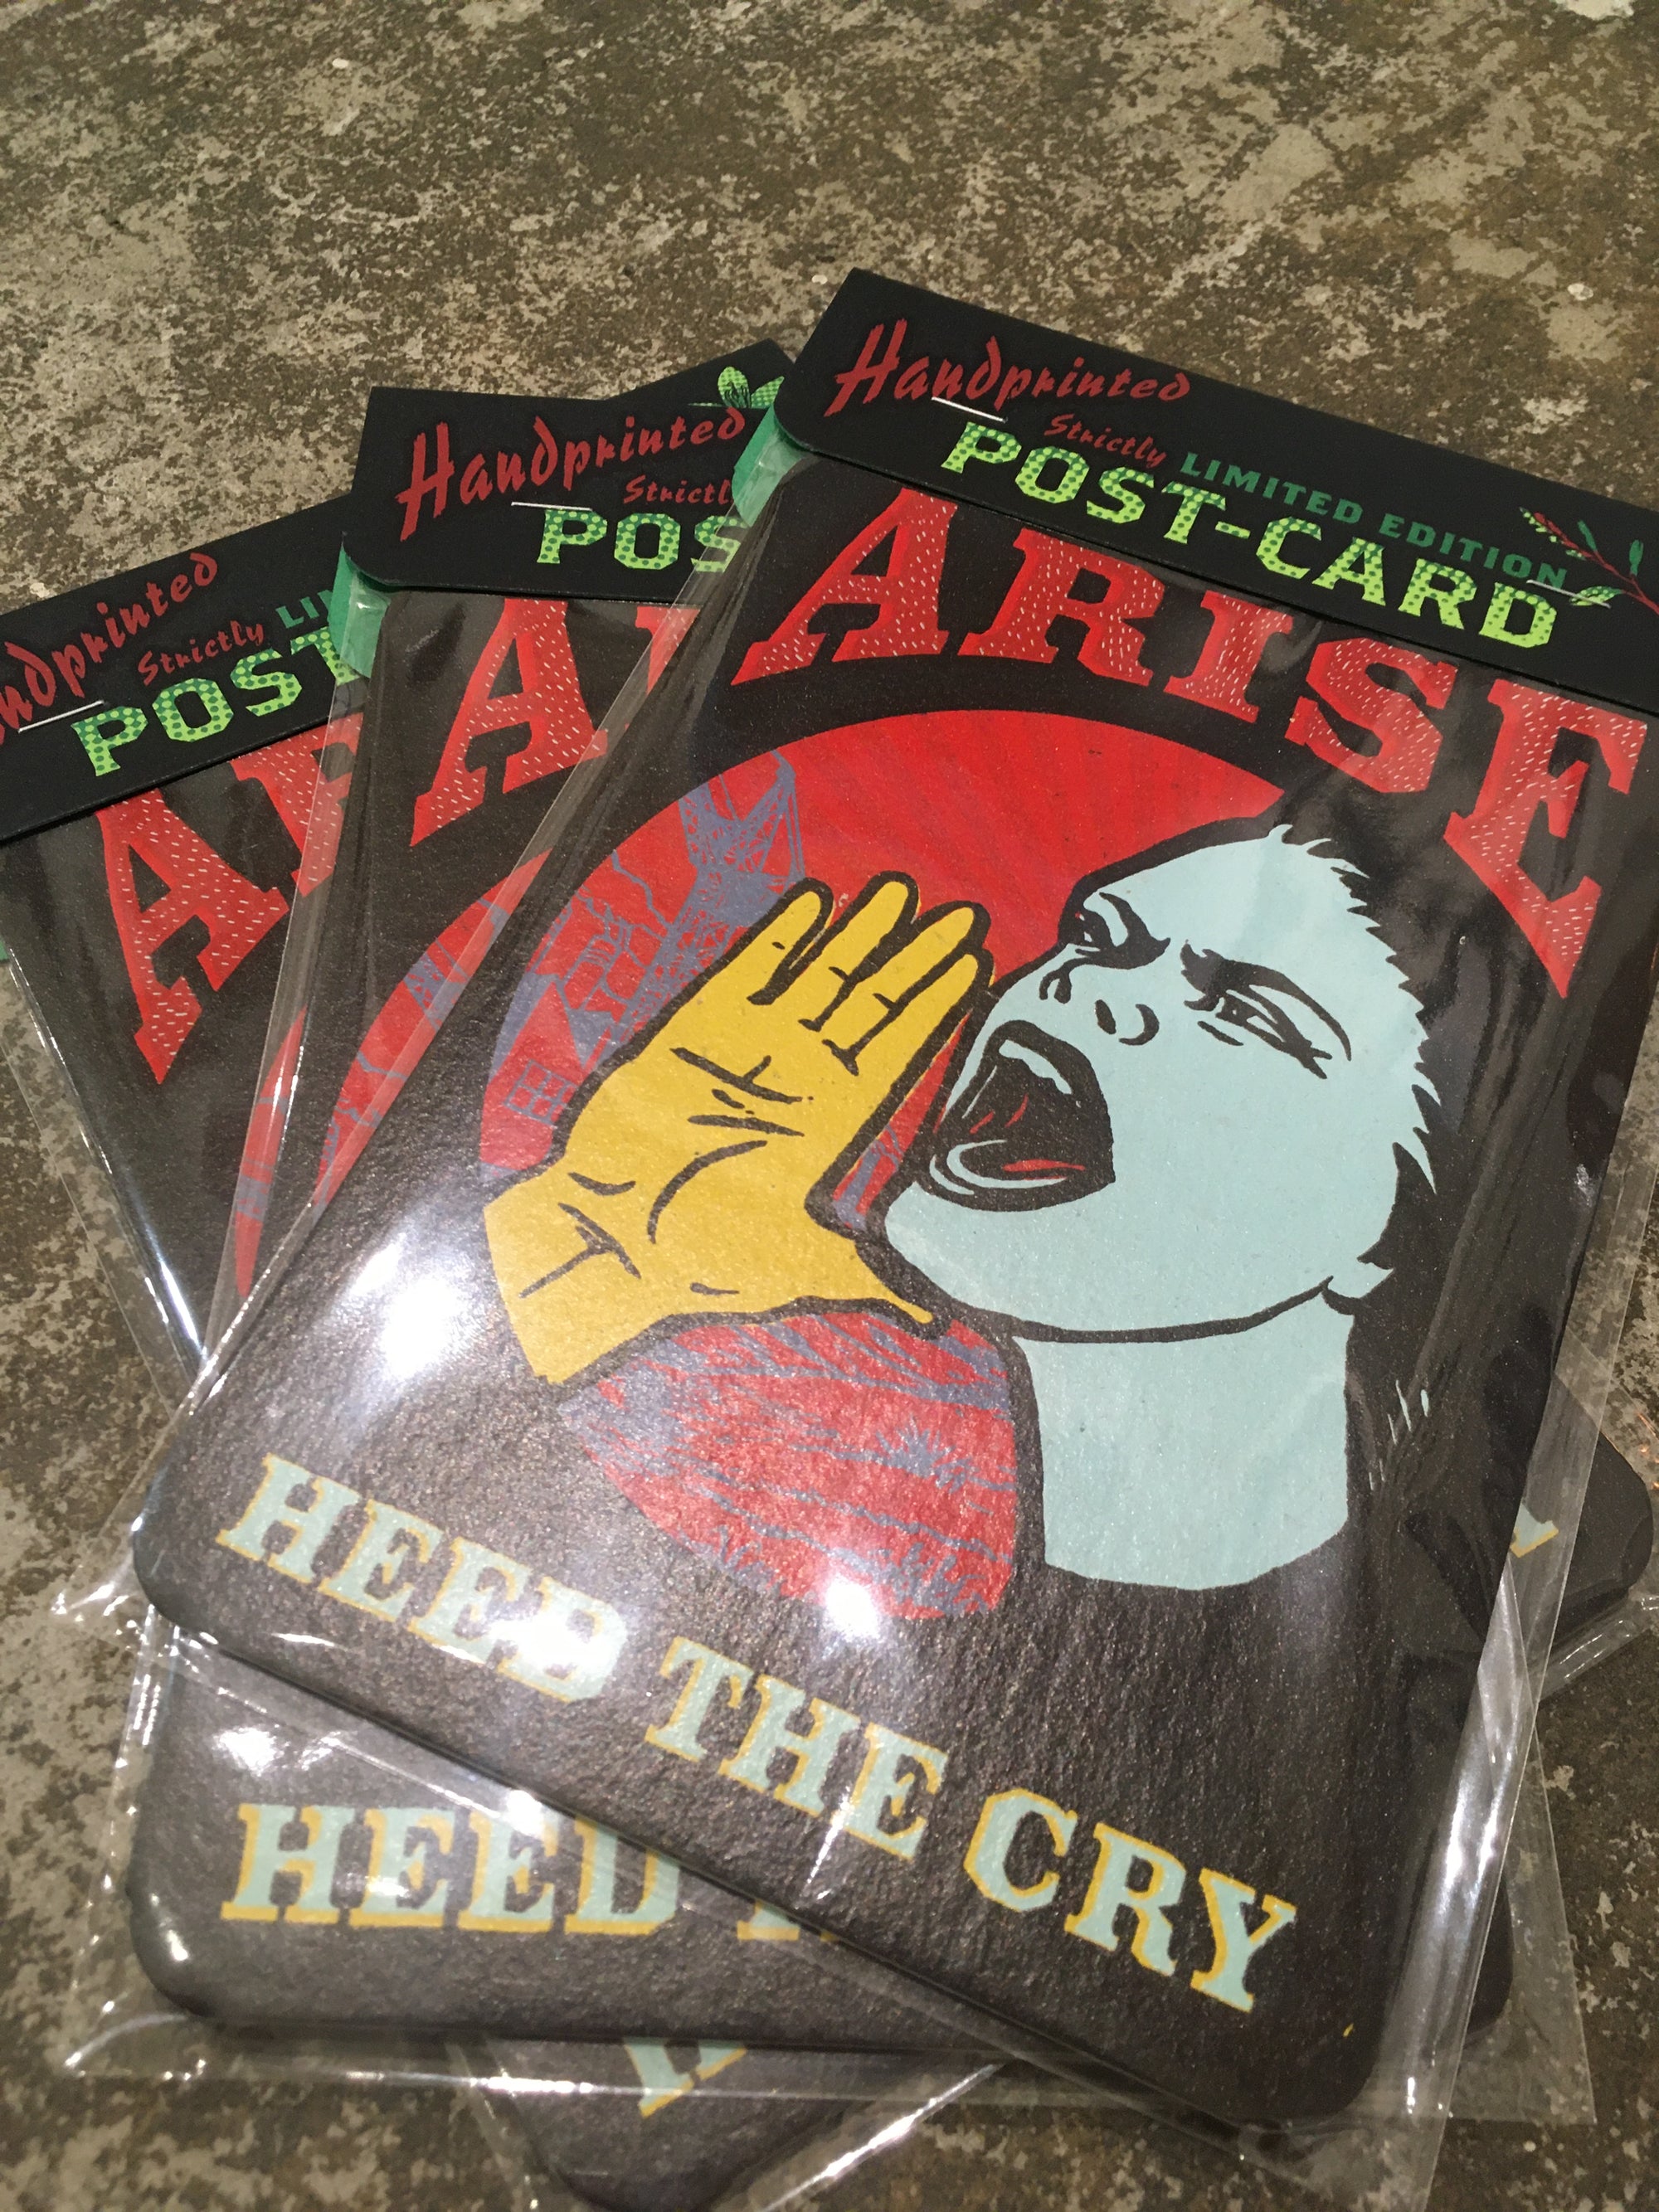 Heed the Cry - Limited Edition Postcard